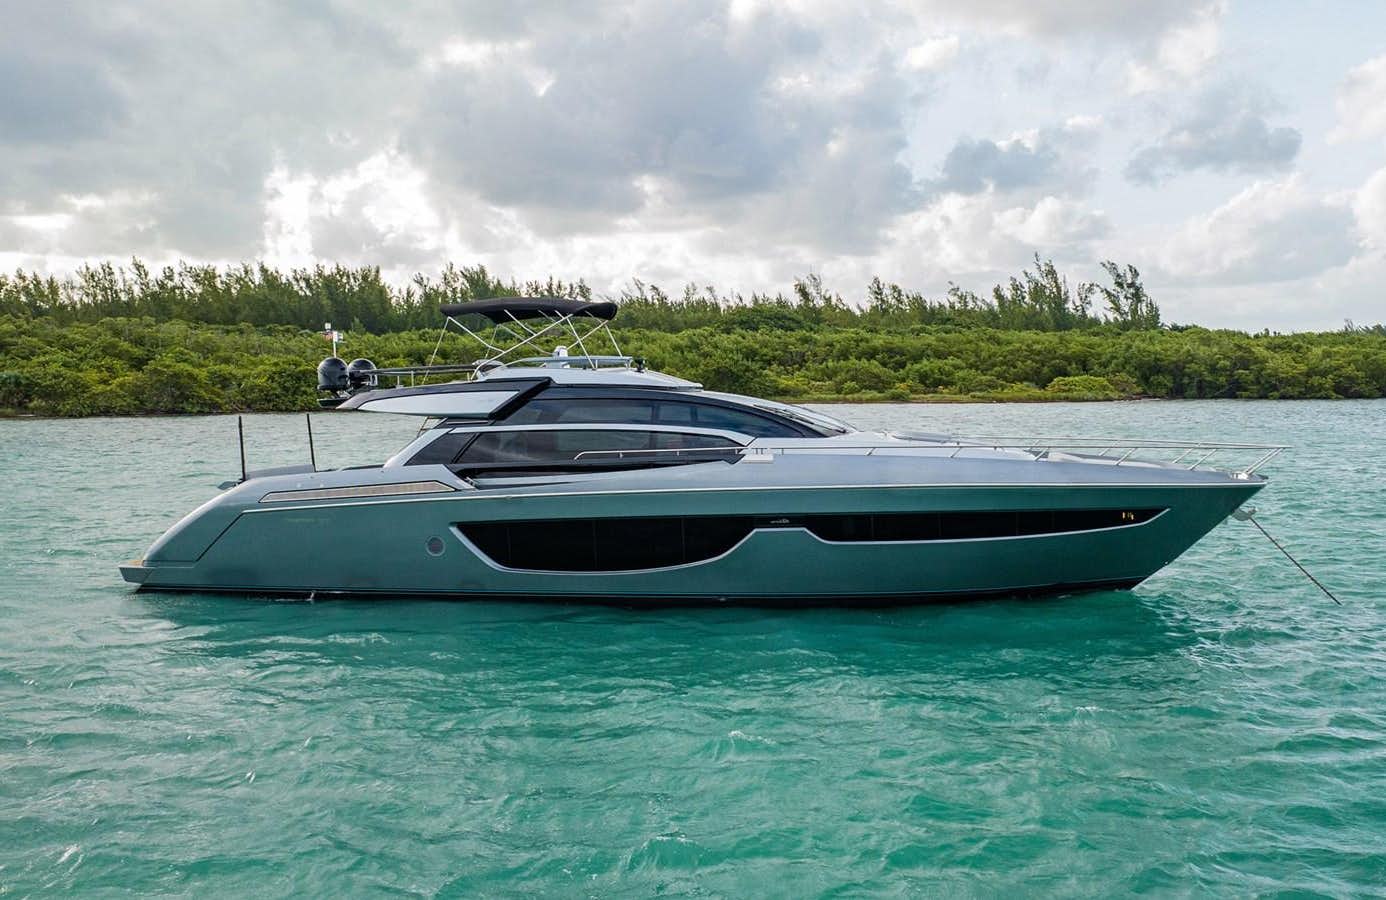 Recreational use
Yacht for Sale